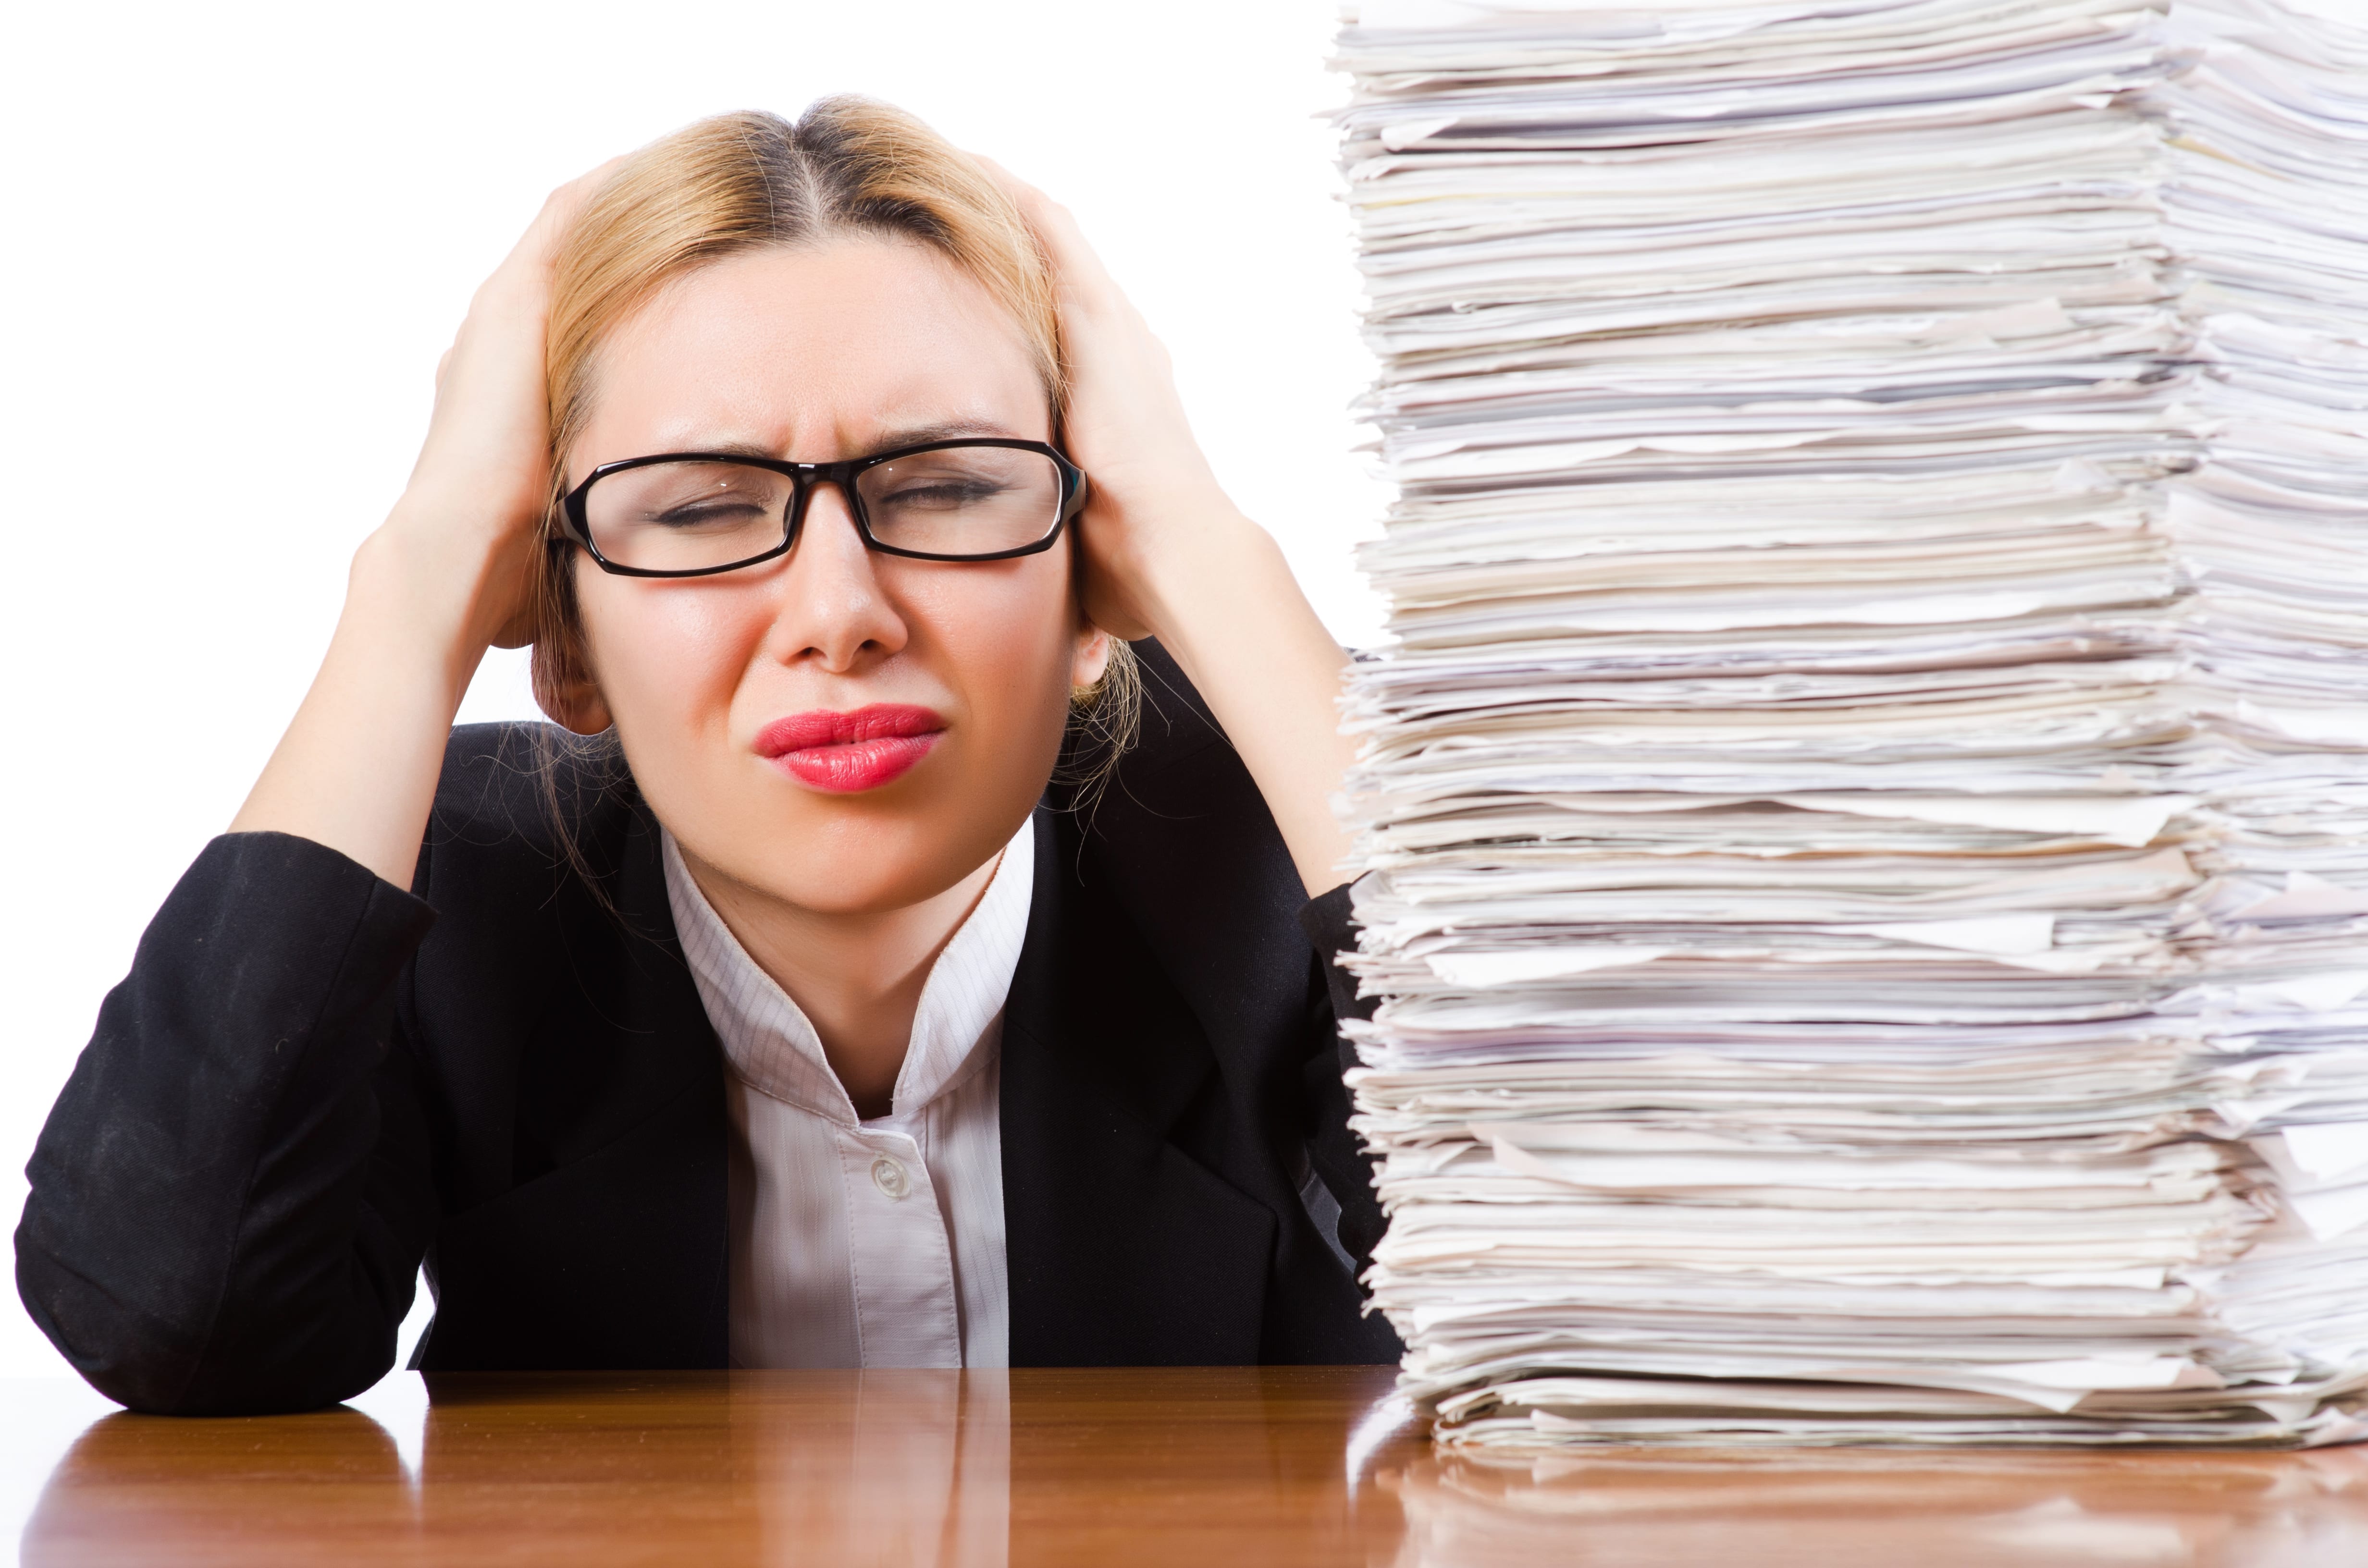 A huge stack of white papers next to a woman holding her head. She has tremendous dental front desk stress.